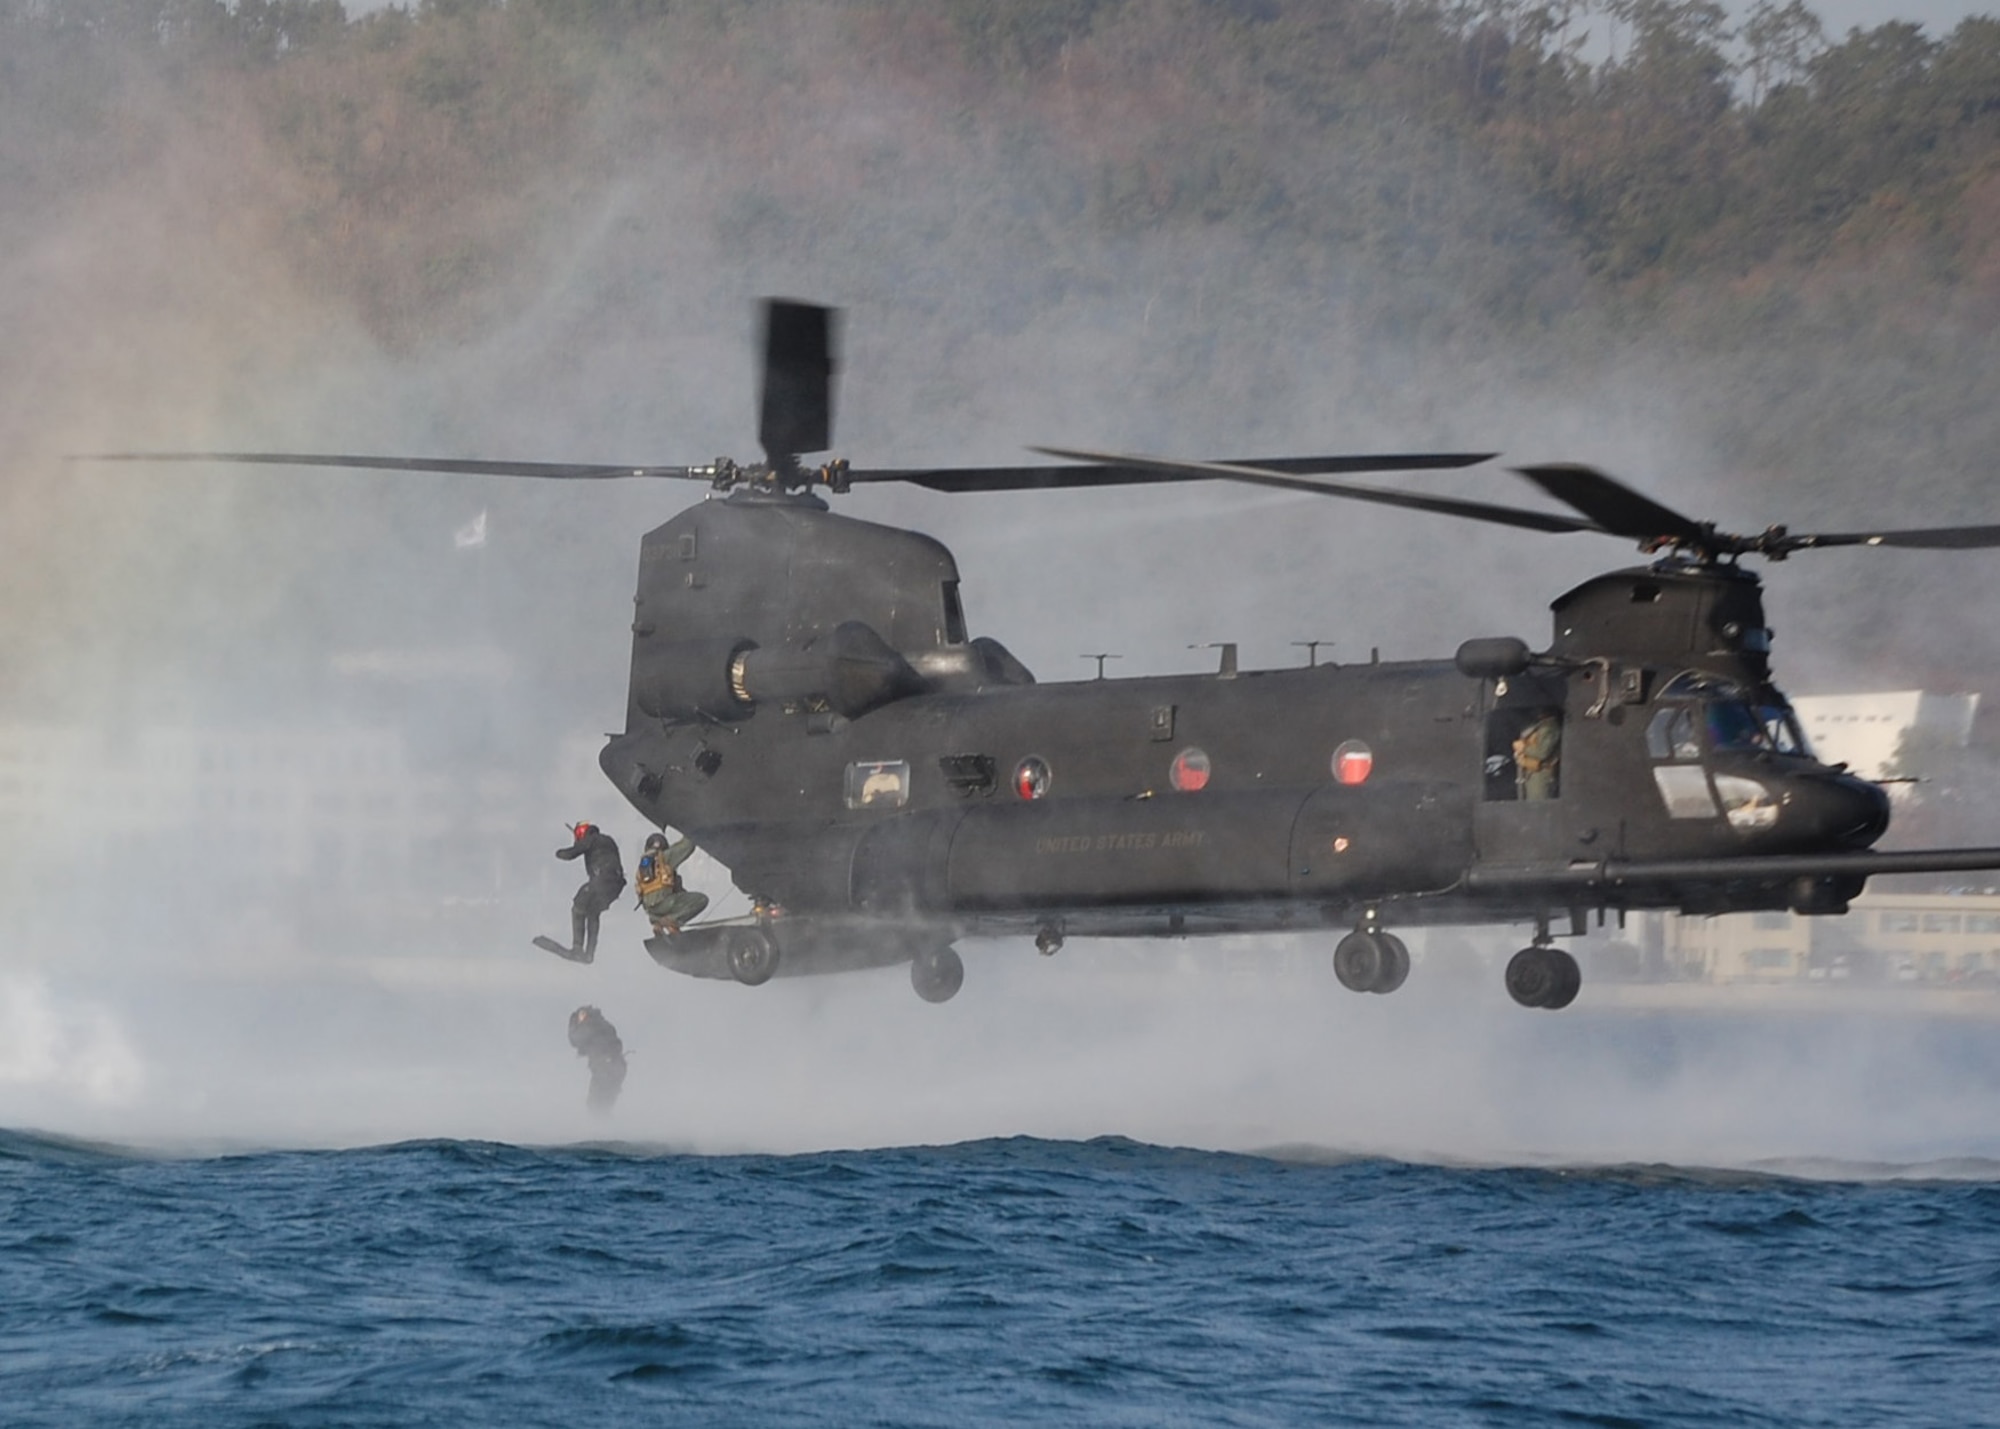 NEAR CHINHAE, Republic of Korea -- Members of the 320th Special Tactics Squadron jump into the water from the back of a U.S. Army MH-47 helicopter from the 160th Special Operations Aviation Regiment (Airborne) during an infiltration/exfiltration training mission here March 20 during Foal Eagle 2009.  Foal Eagle is an annual combined training exercise for U.S. and Republic of Korea forces to evaluate and improve their ability to coordinate procedures, plans and systems necessary to defend the ROK. The 320th STS is deployed from Kadena Air Base, Japan, and the 160th SOAR is deployed from Fort Lewis, Wash. (U.S. Air Force photo by James D'Angina)